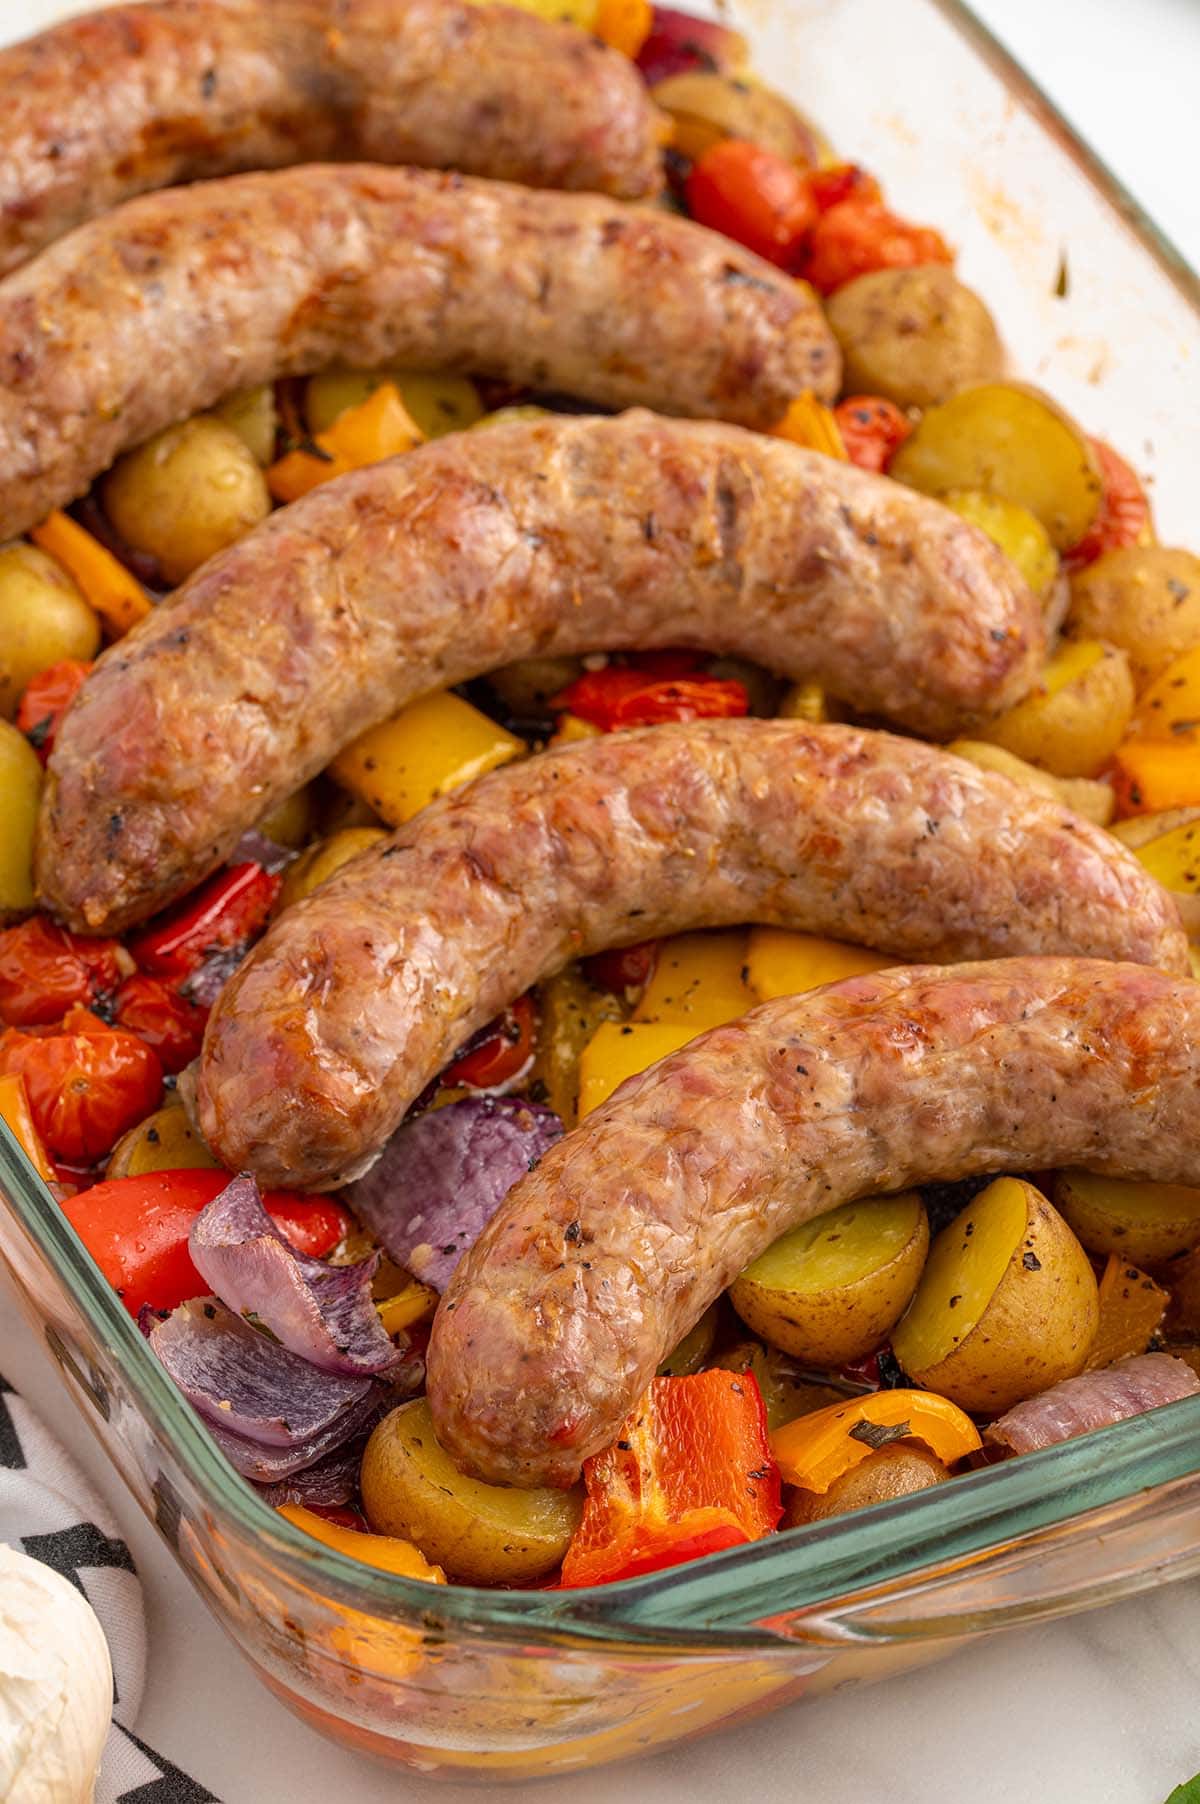 five pieces of baked italian sausages on top of baked vegetables.